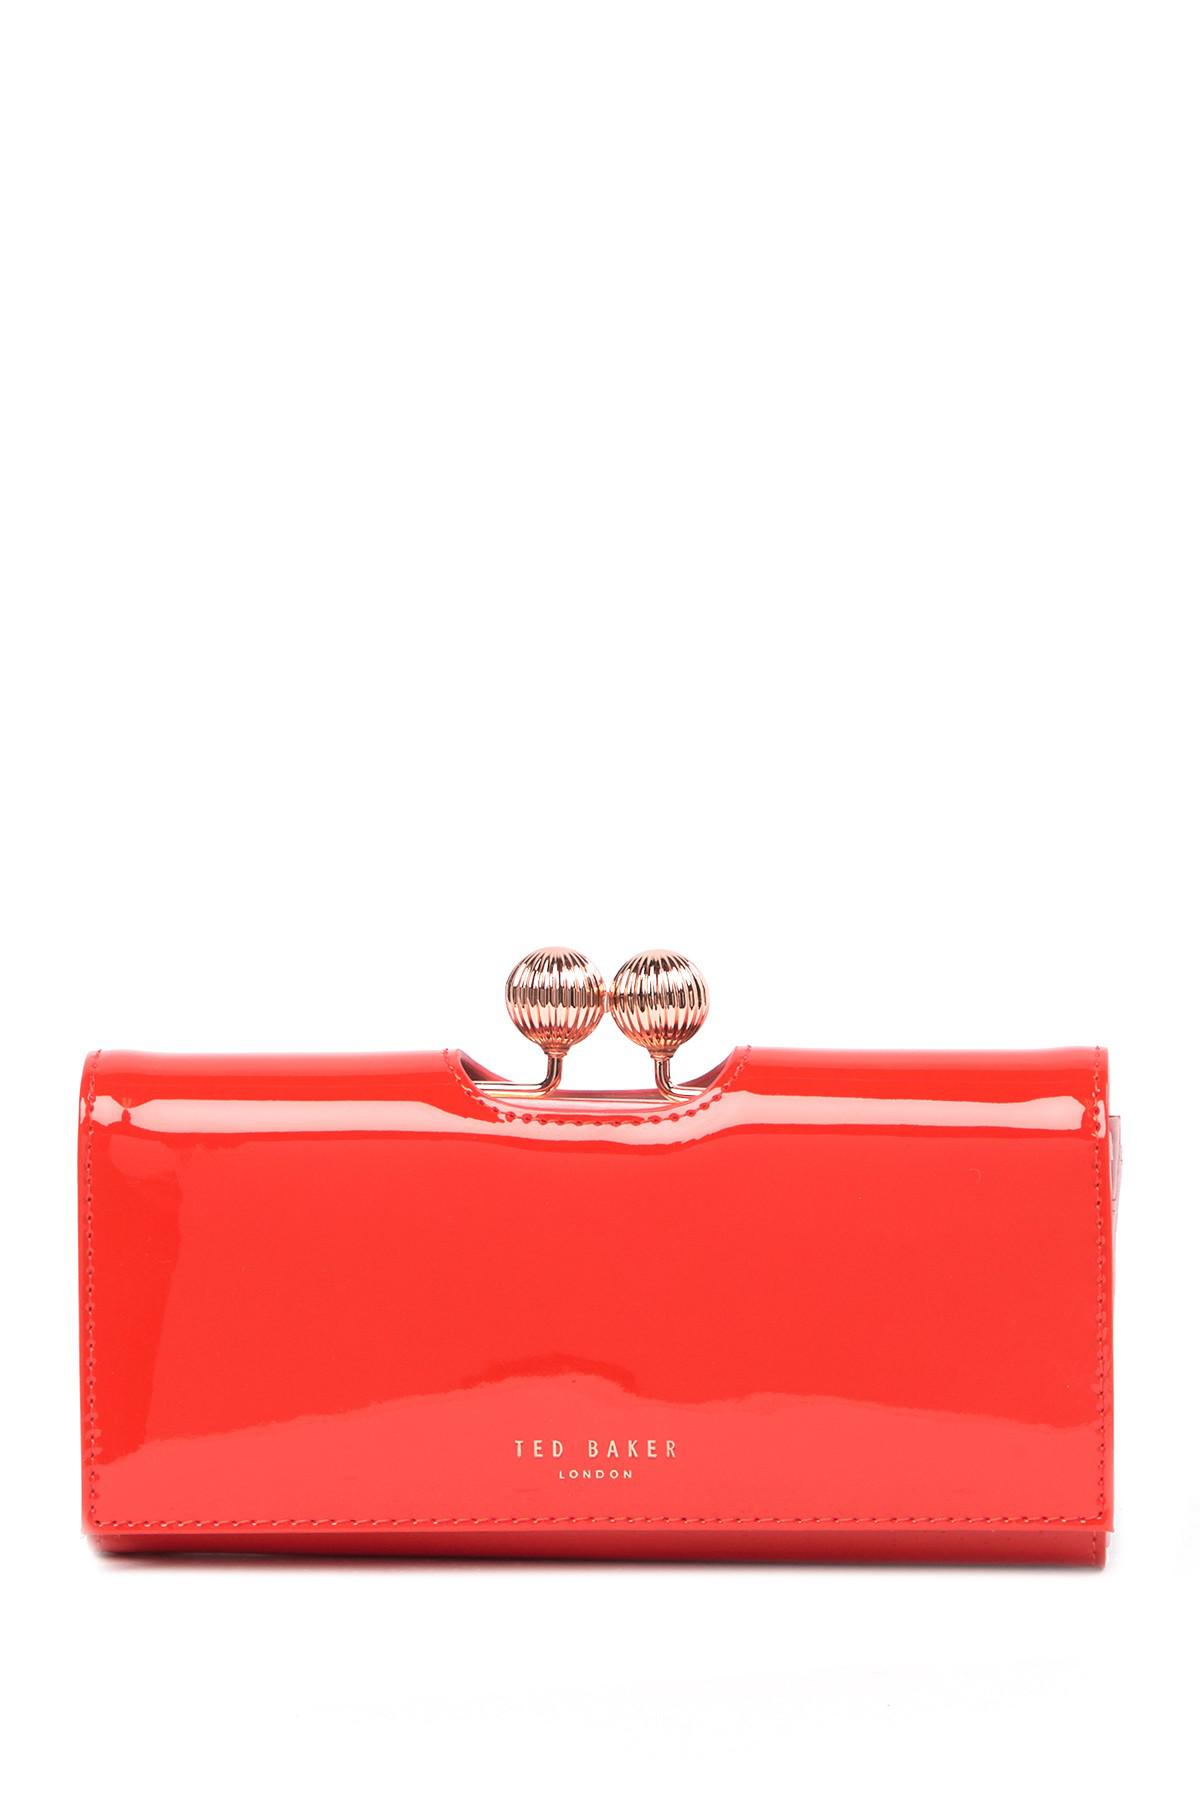 Ted Baker Bobble Patent Leather Wallet in Red - Lyst